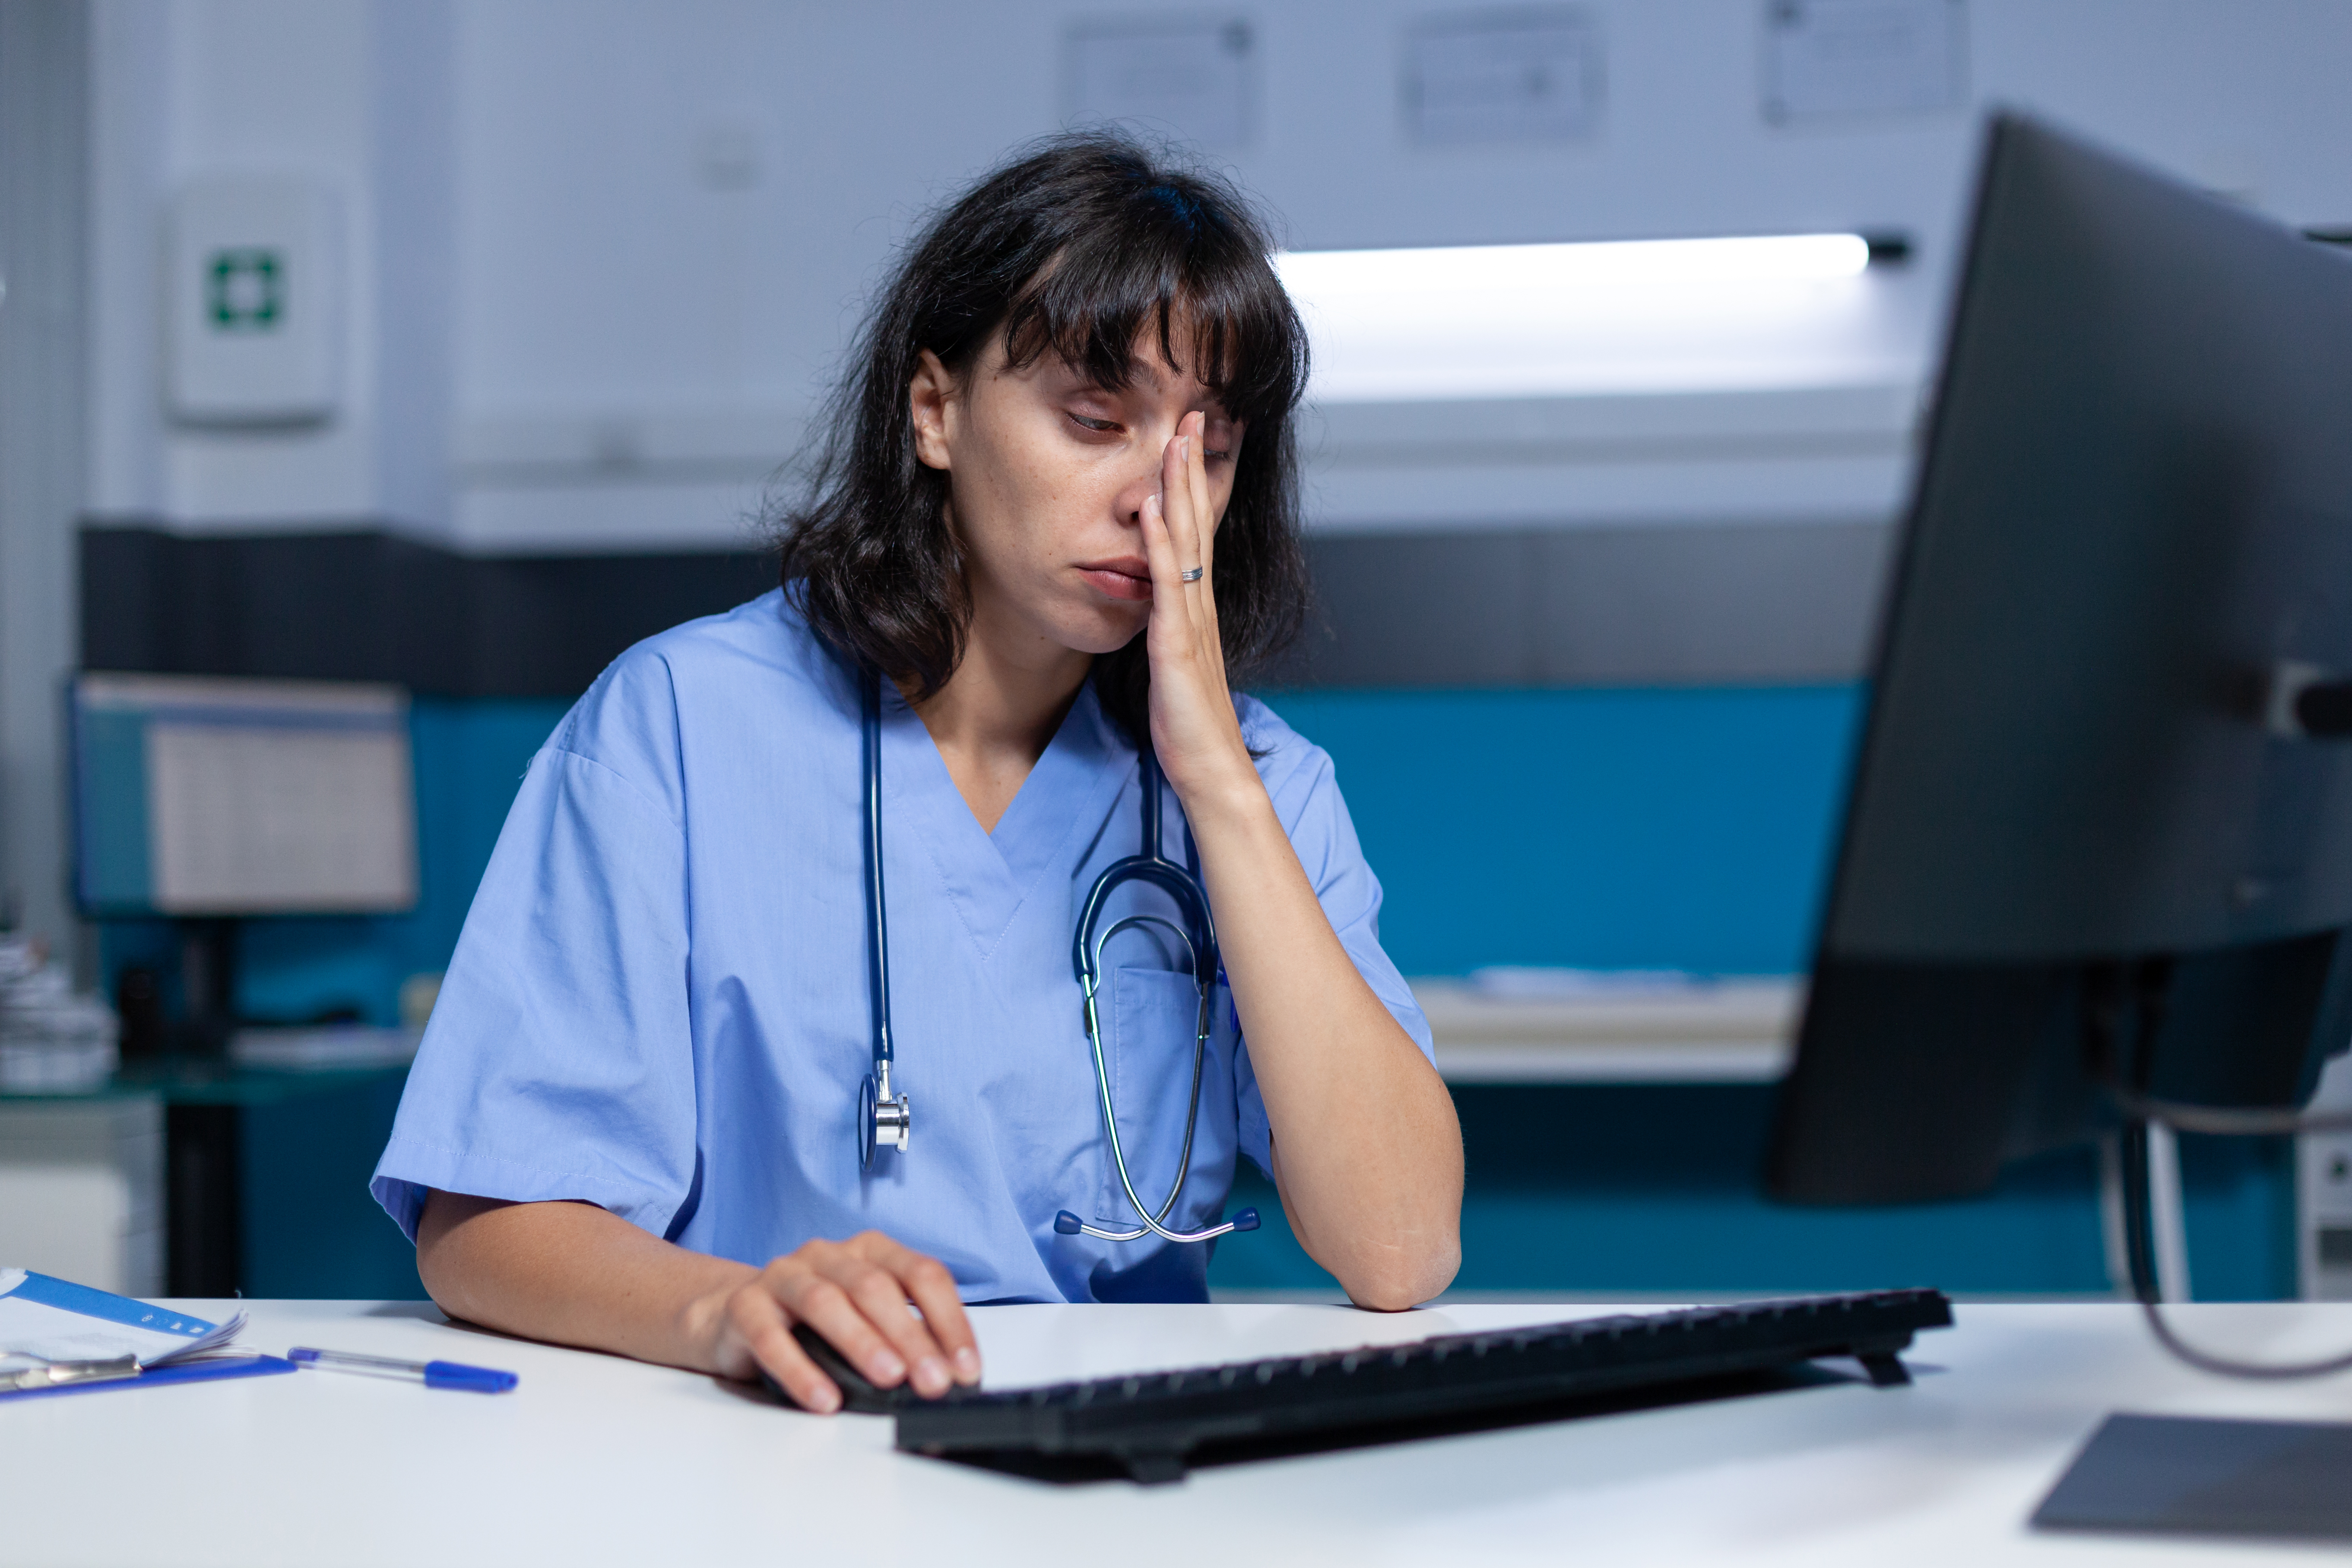 Are Female Physicians at a Higher Risk of Burnout than Male Physicians?